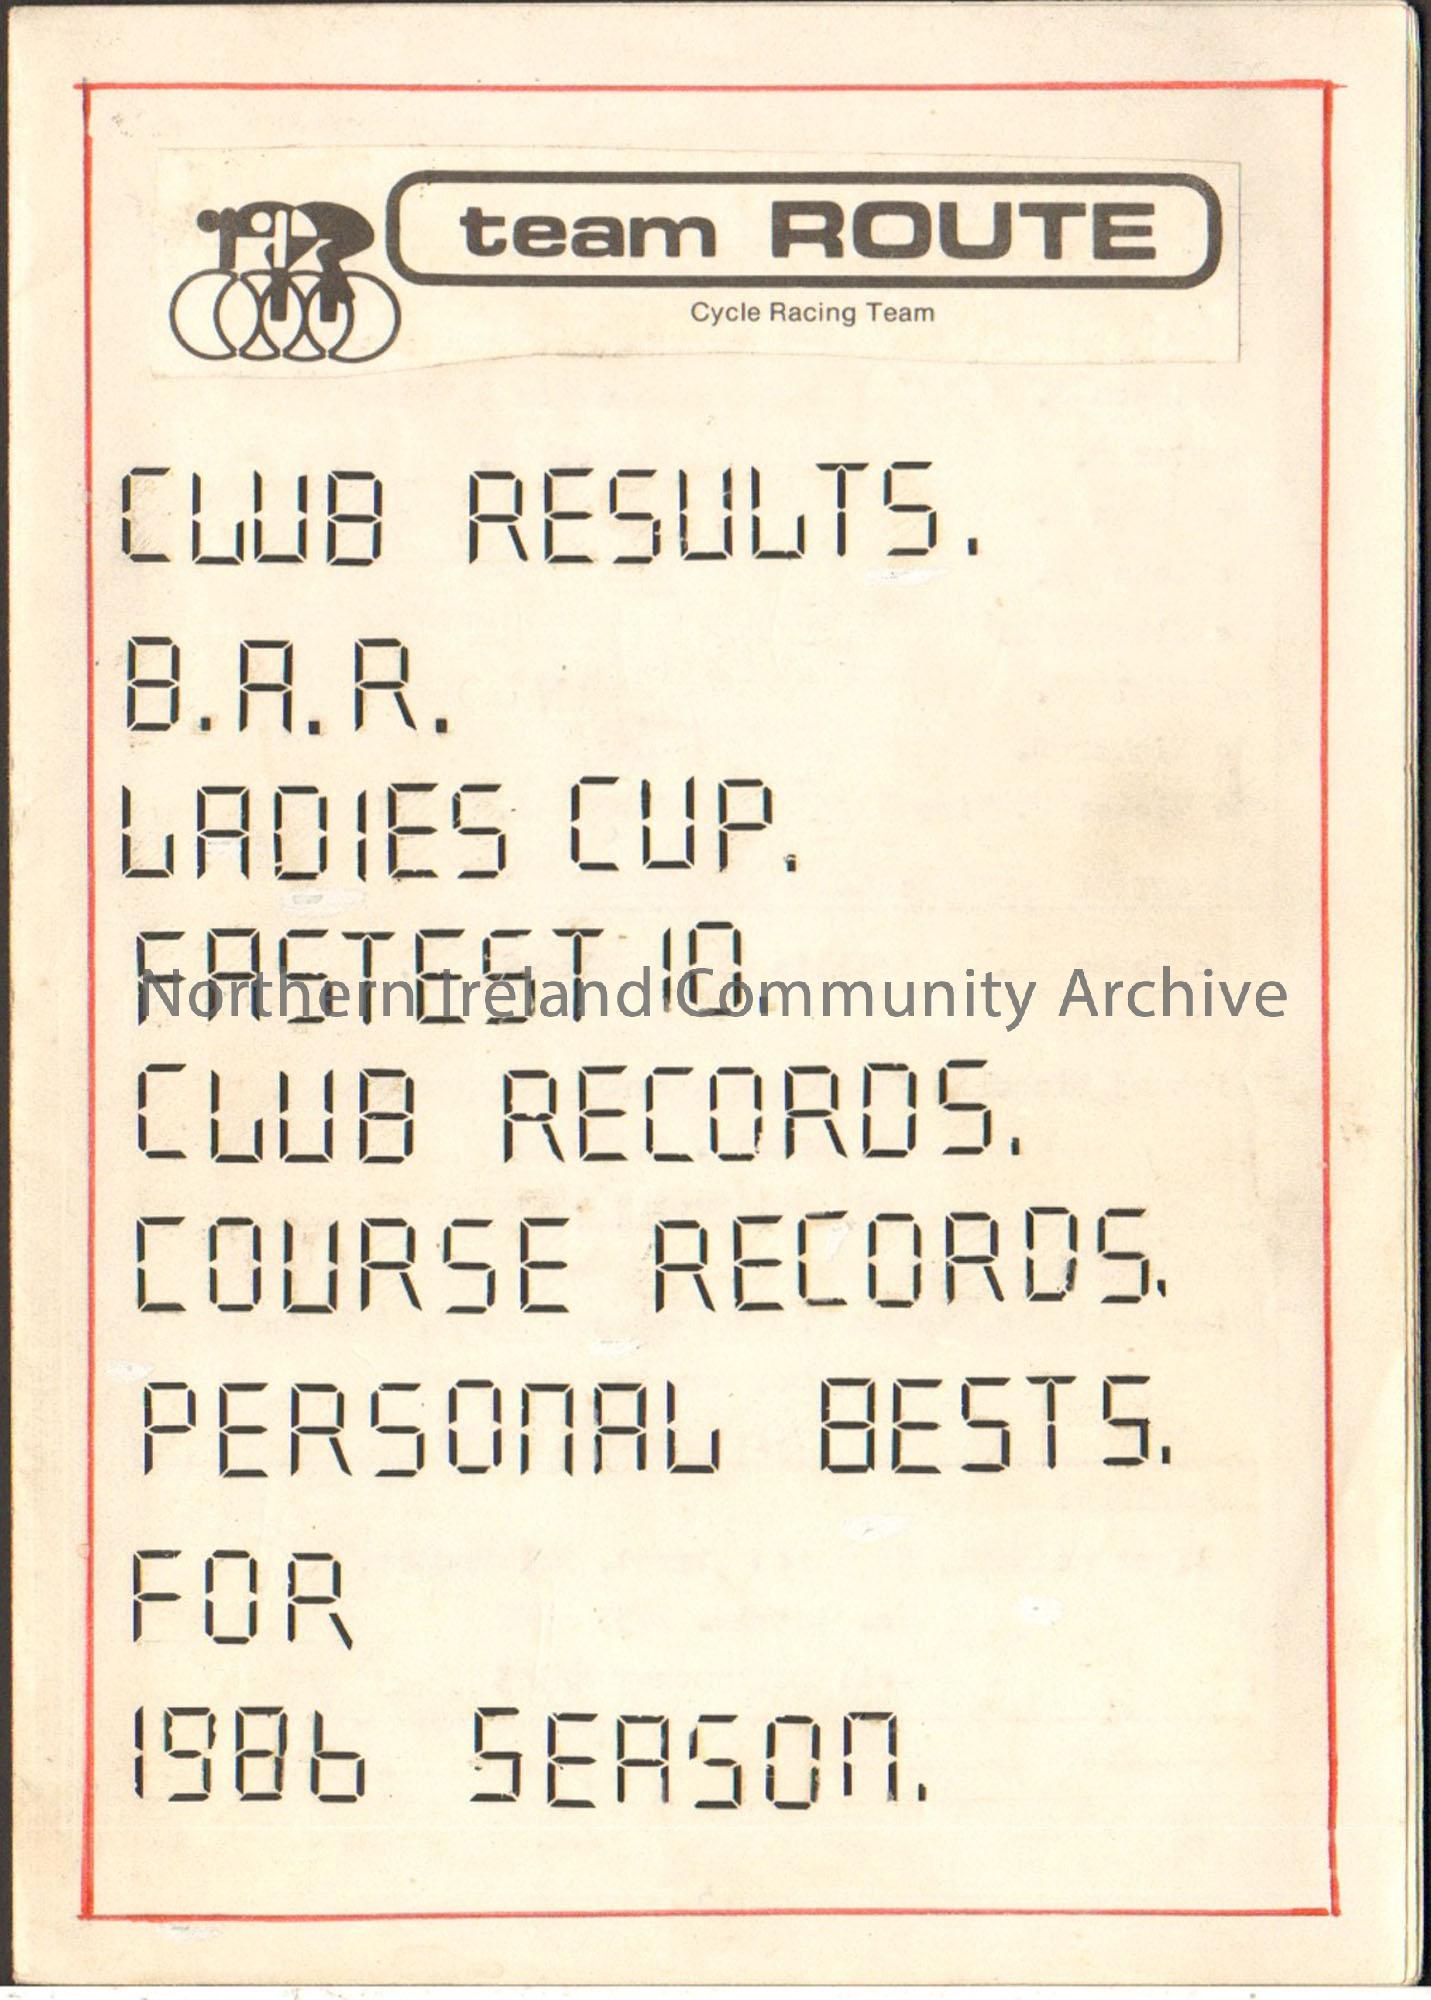 Team Route 1986 season. Club results, B.A.R, Ladies Cup, Fastest 10, Club Records, Course Records, Personal Bests. White booklet with Team Route logo …